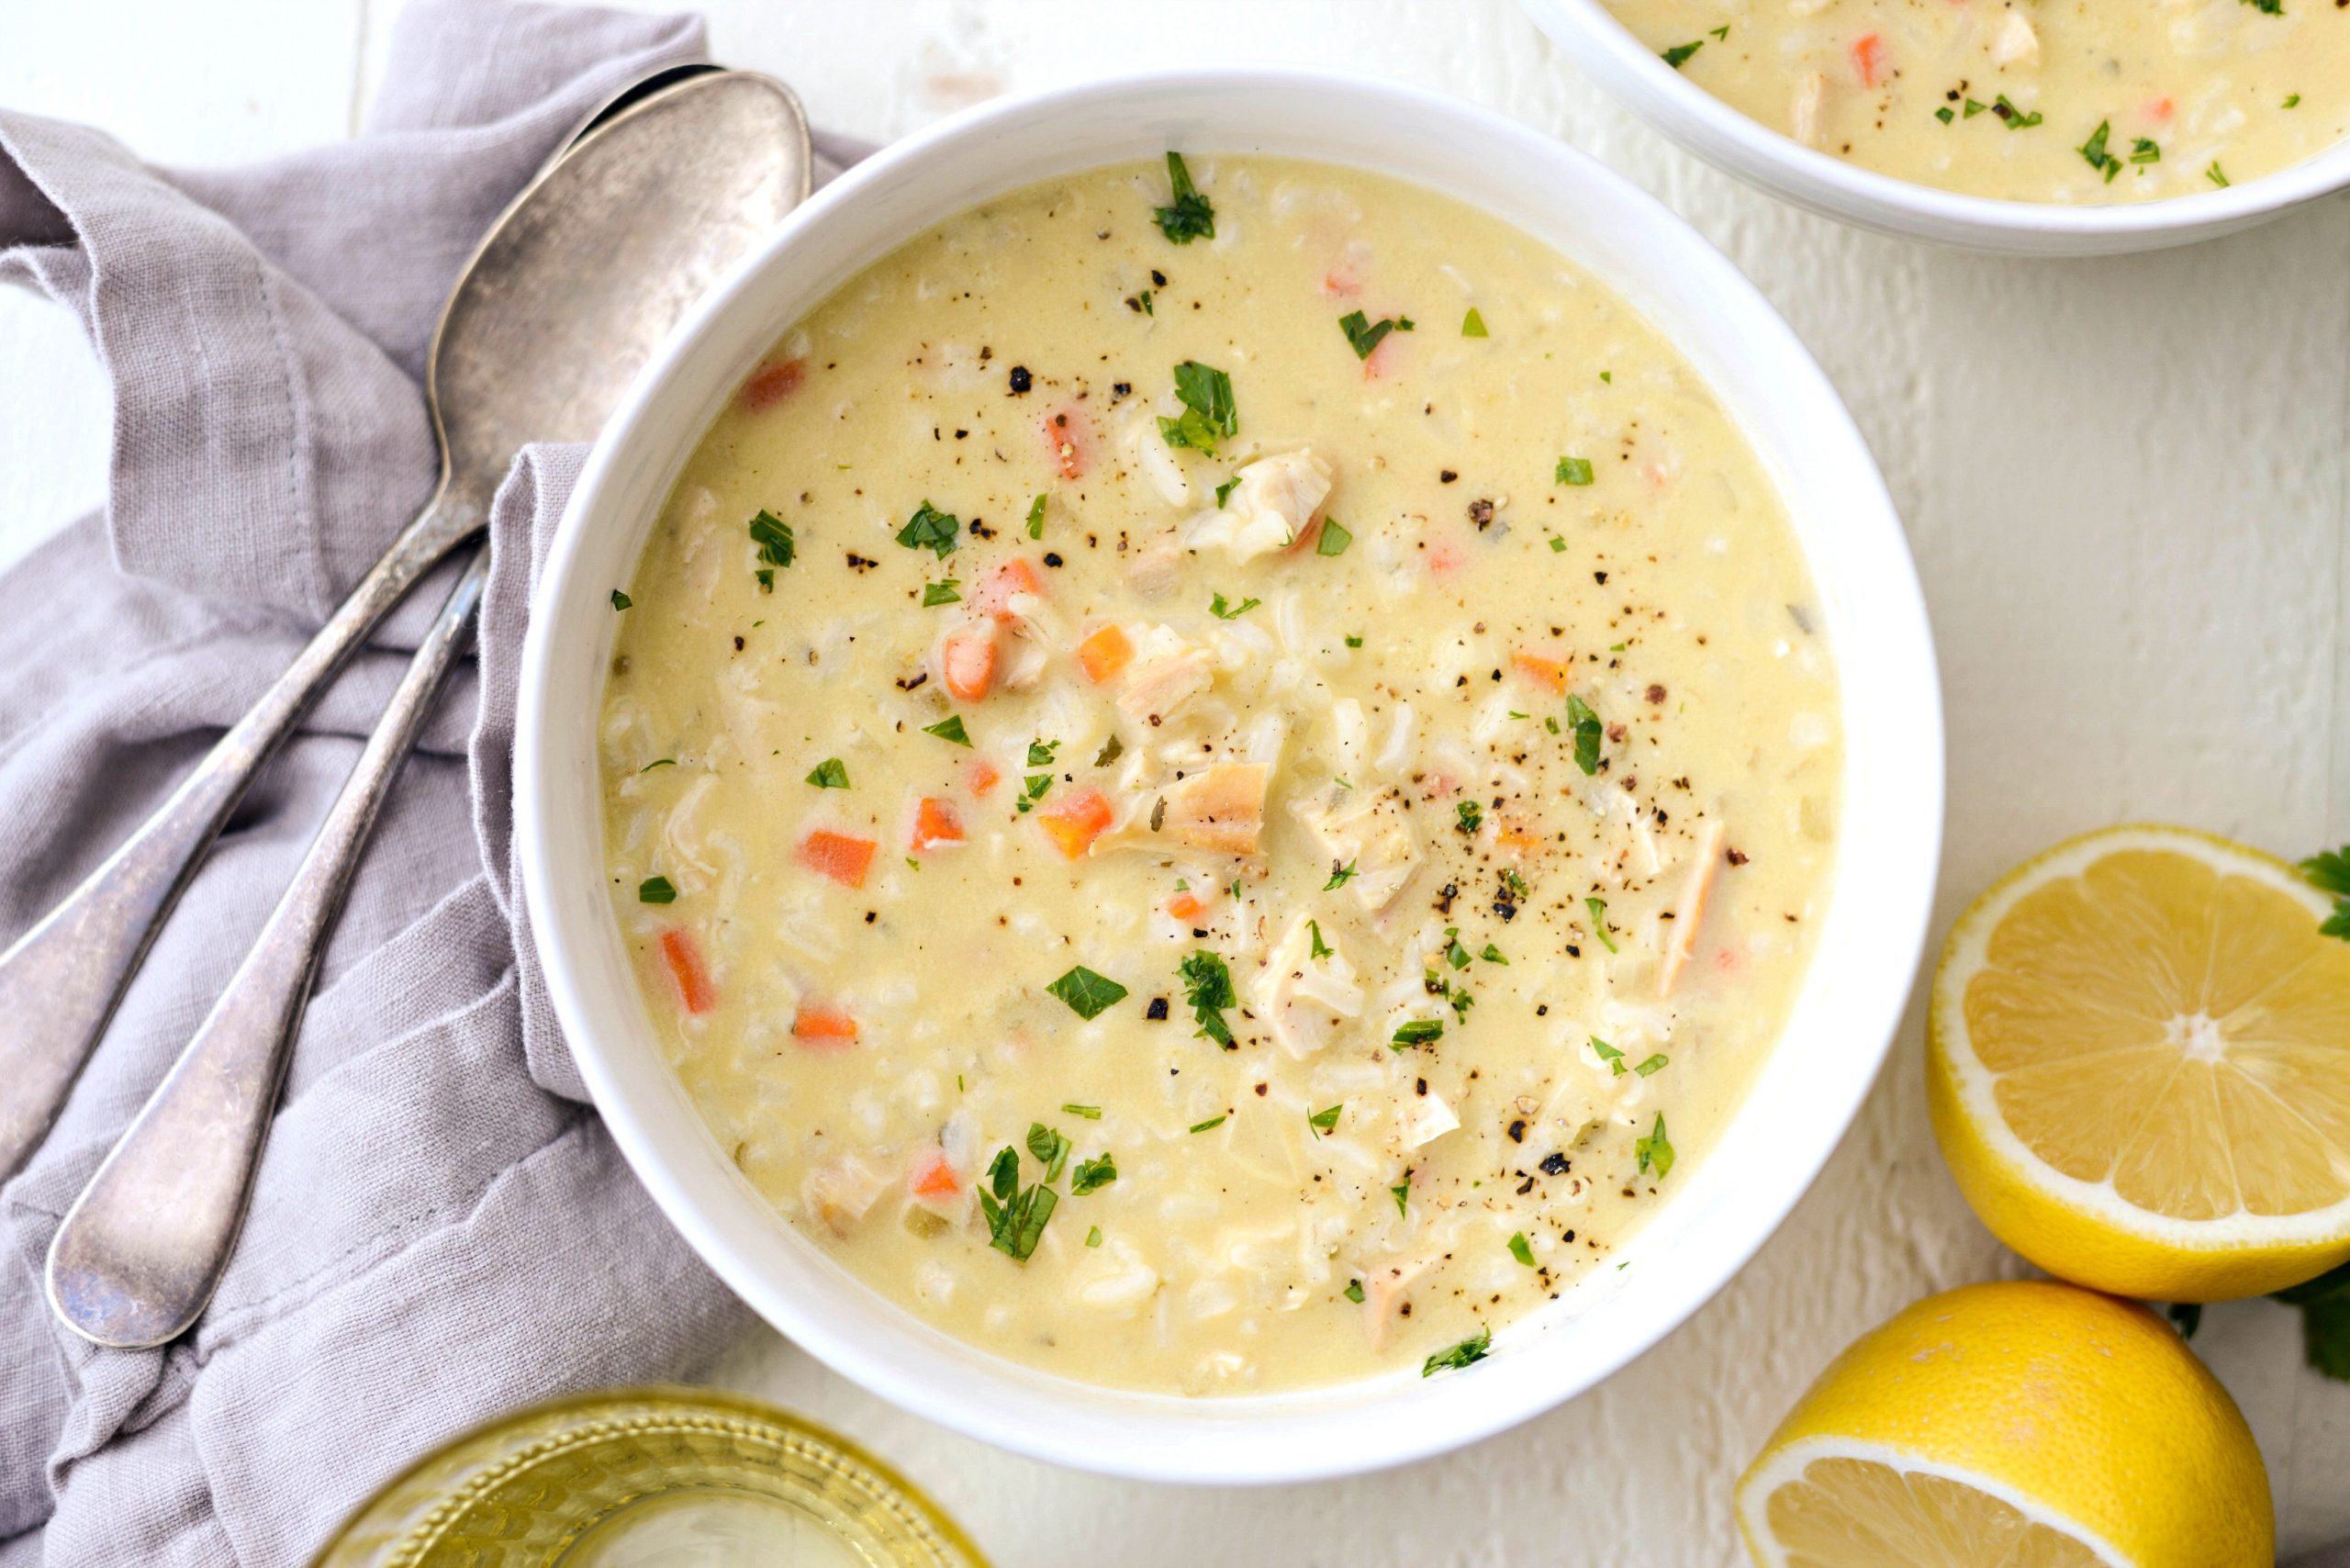 https://www.simplyscratch.com/wp-content/uploads/2019/02/Creamy-Chicken-Lemon-Rice-Soup-l-SimplyScratch.com-lemon-chicken-rice-soup-homemade-easy-recipe-fromscratch-healthy-10-scaled.jpg